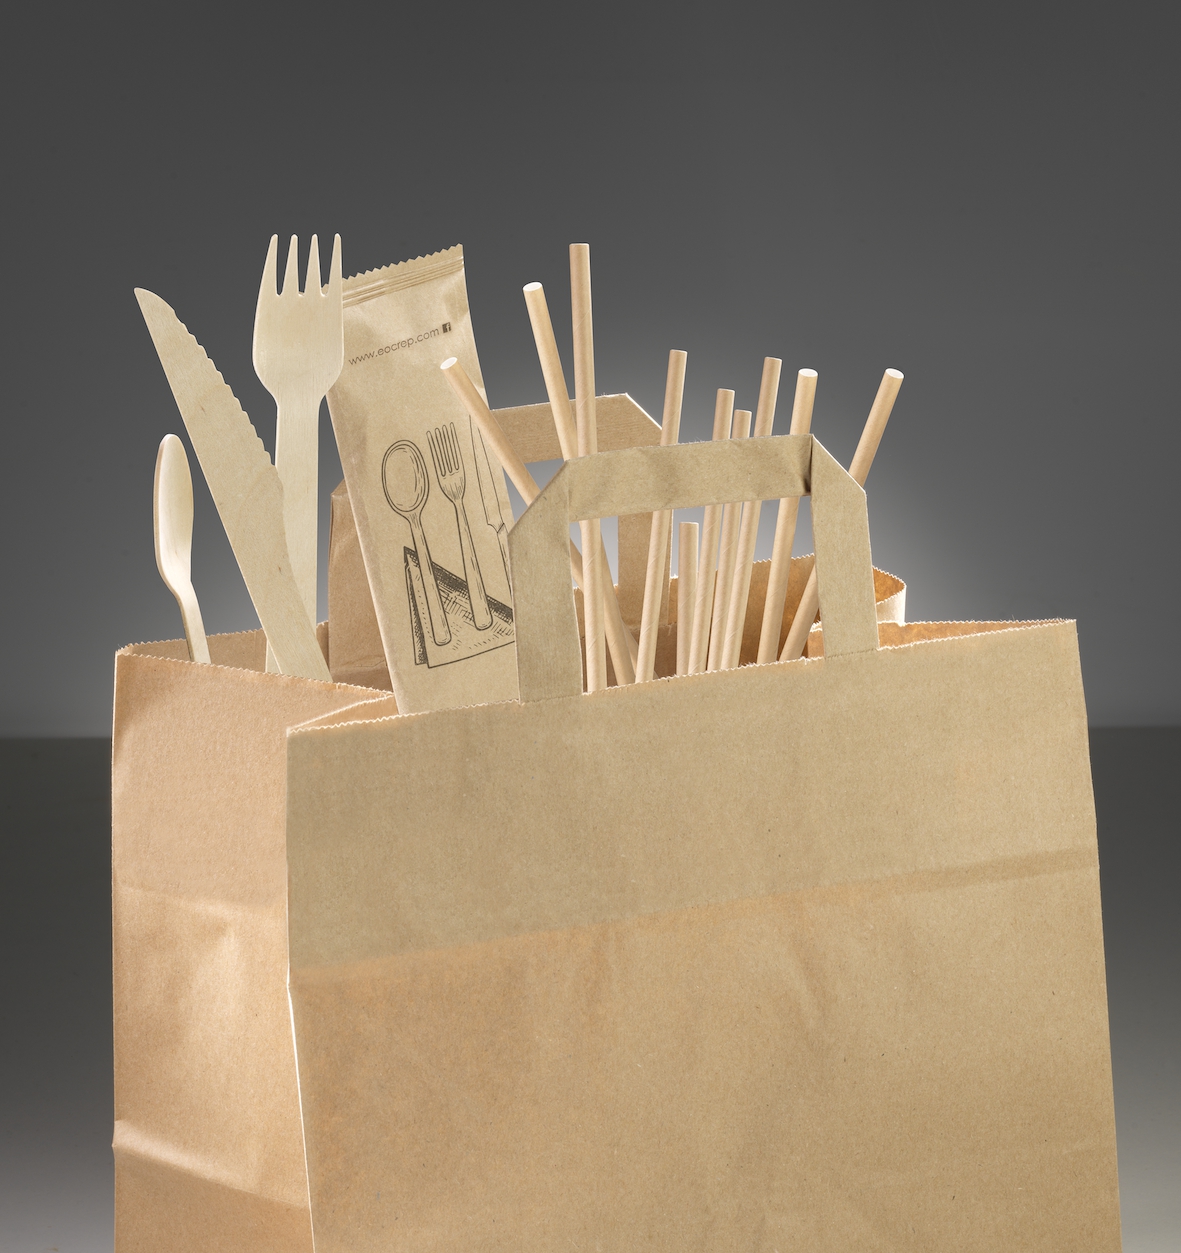 soustainable and compostable straws, cutlery and paper bag